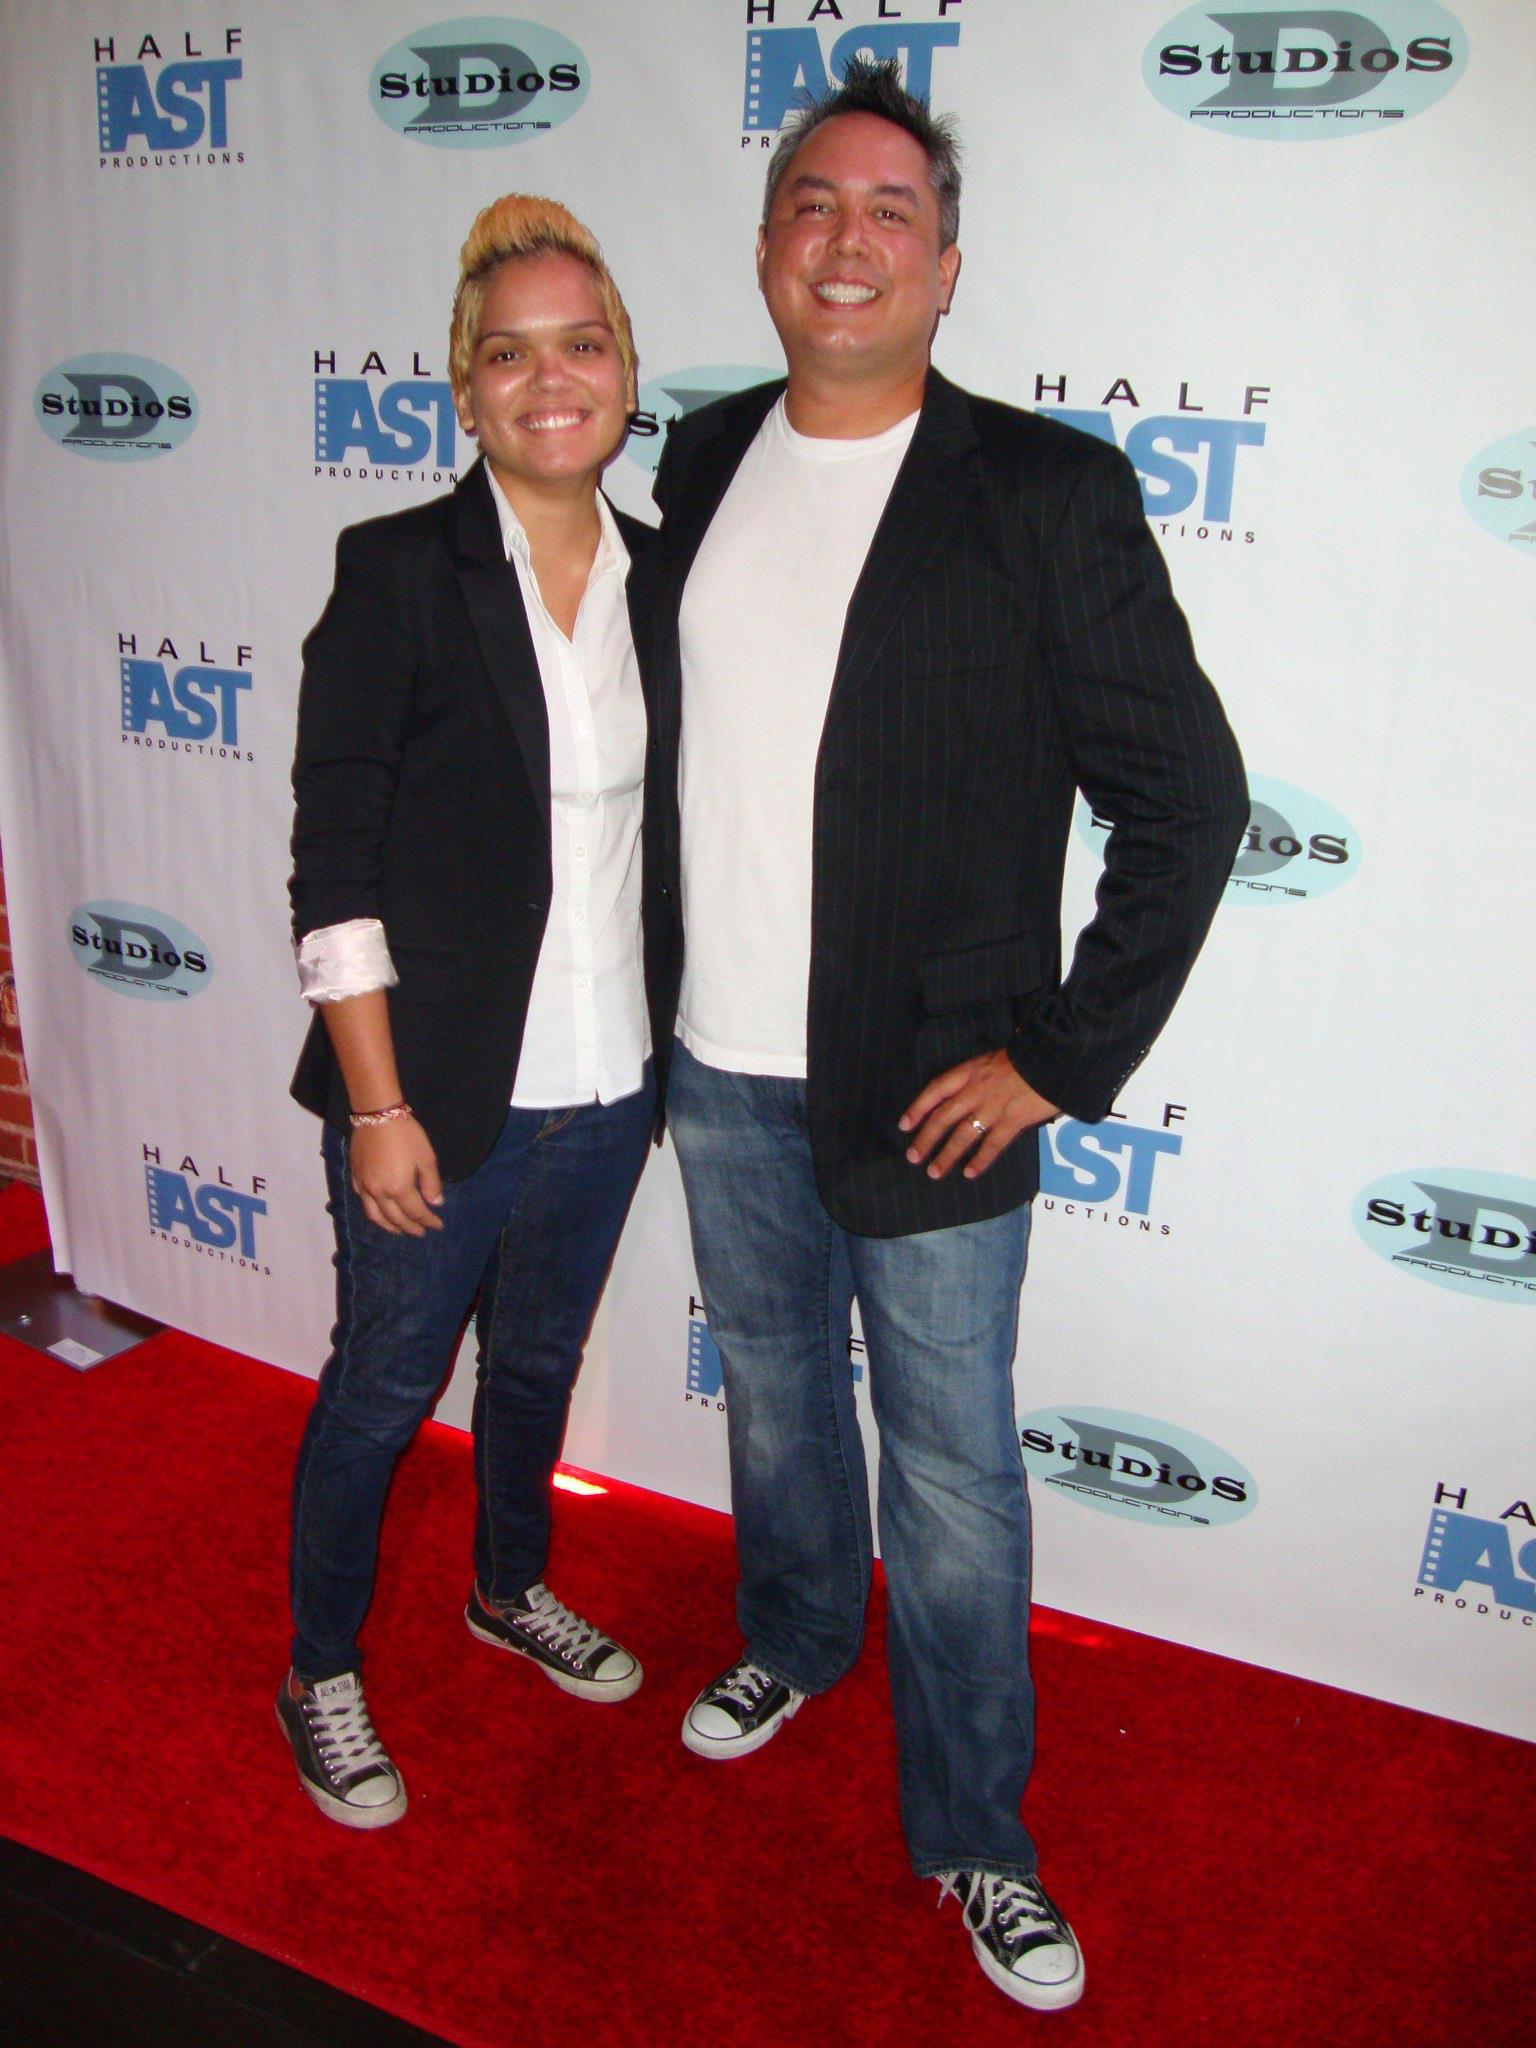 Katherine Ramos and David Schatanoff, Jr. on the red carpet for the Claire cast and crew screening